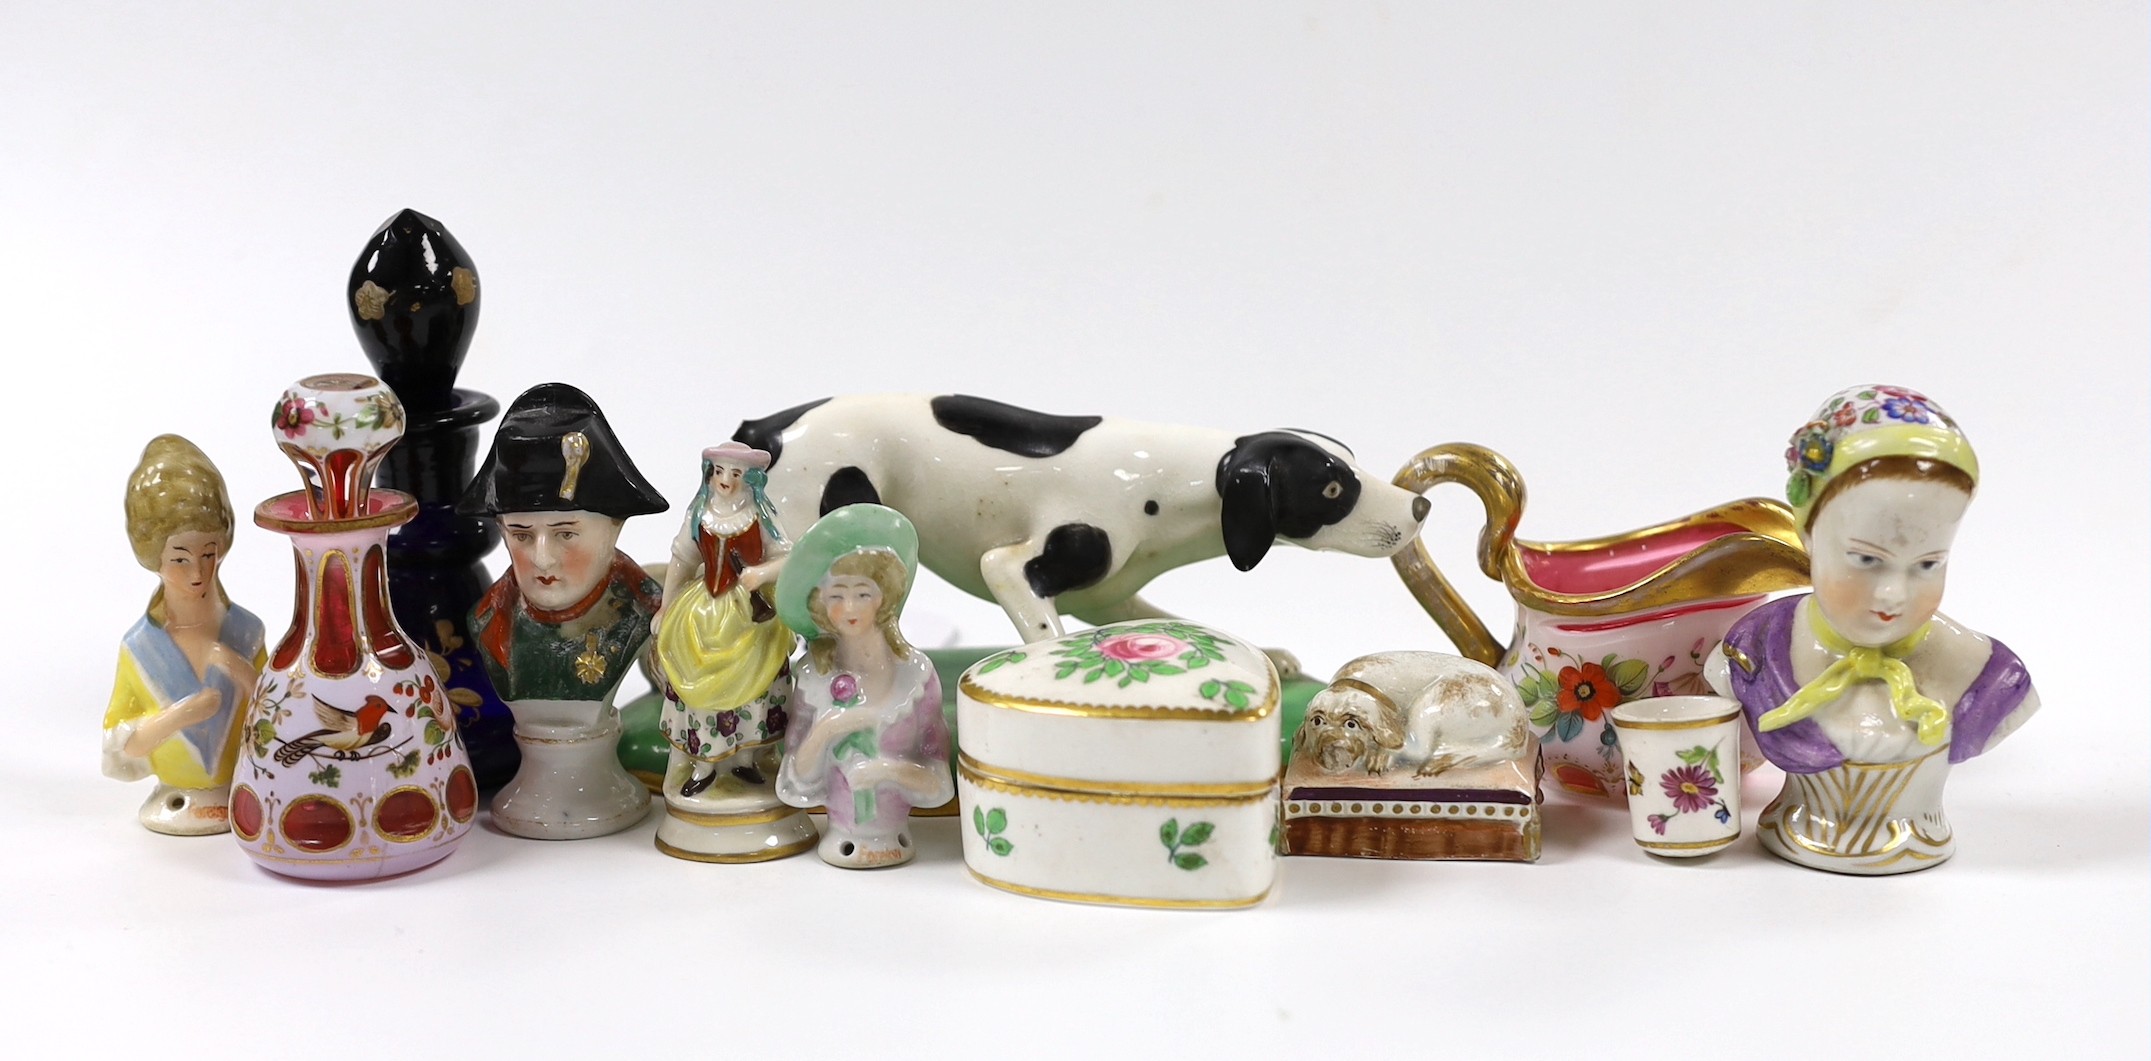 An early 19th century earthenware sleeping dog, a Victorian bone china model of a dog, a miniature overlaid glass decanter and ewer, etc. (12)